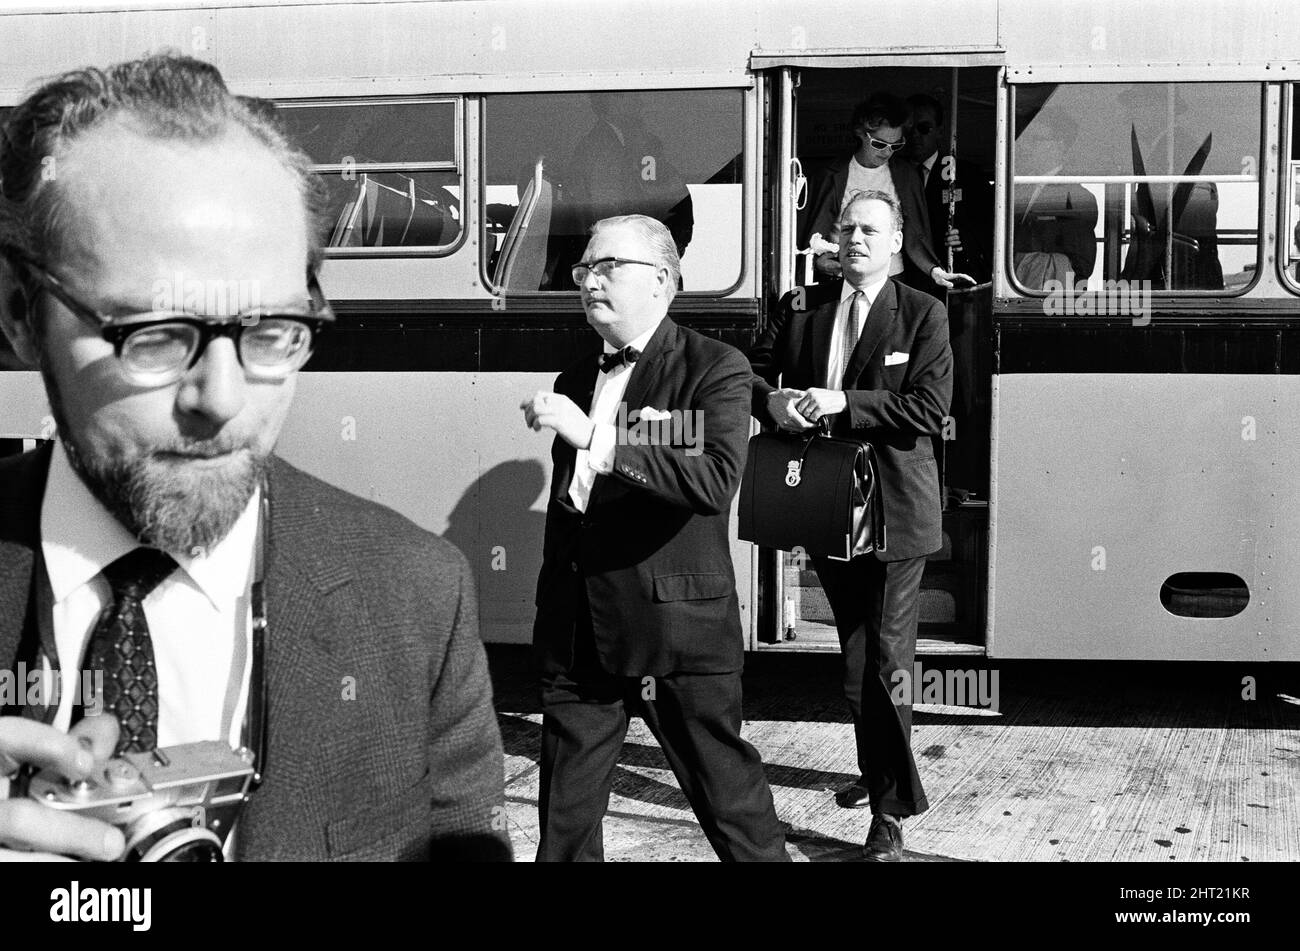 Detective Chief inspector John Hensley (wearing glasses, not the man holding camera) and Detective Inspector Jack Slipper leave London airport for Glasgow to bring John Duddy back to London. John Duddy was wanted for questioning in connection with the shooting of three London policemen. He later went on to be convicted of murder and possession of firearms and sentenced to life imprisonment. 18th August 1966. Stock Photo